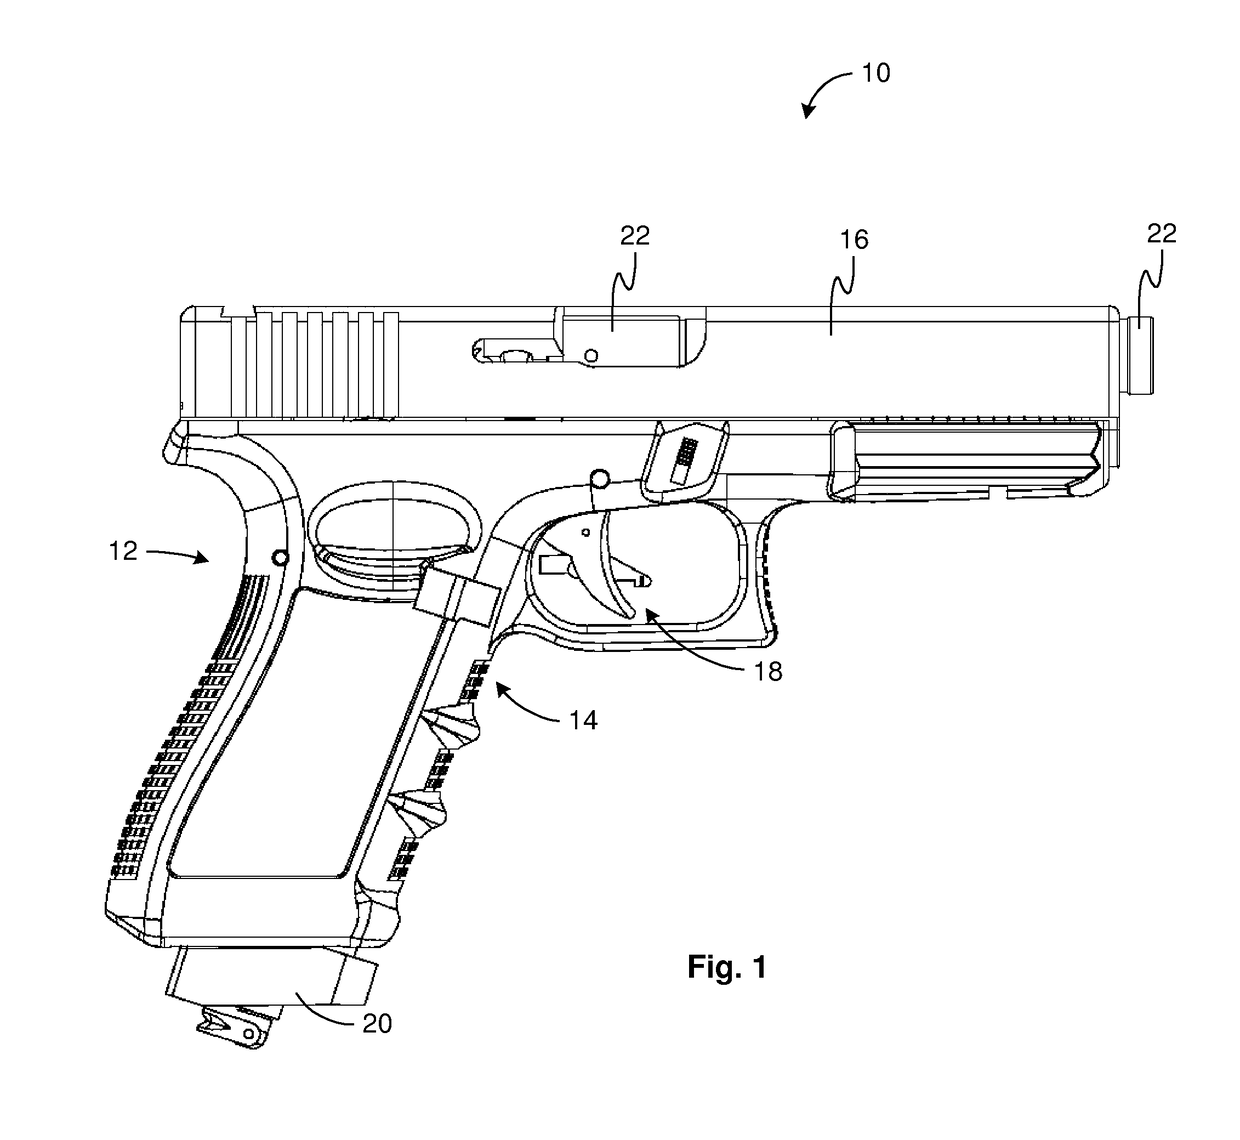 Pneumatic system and method for simulated firearm training